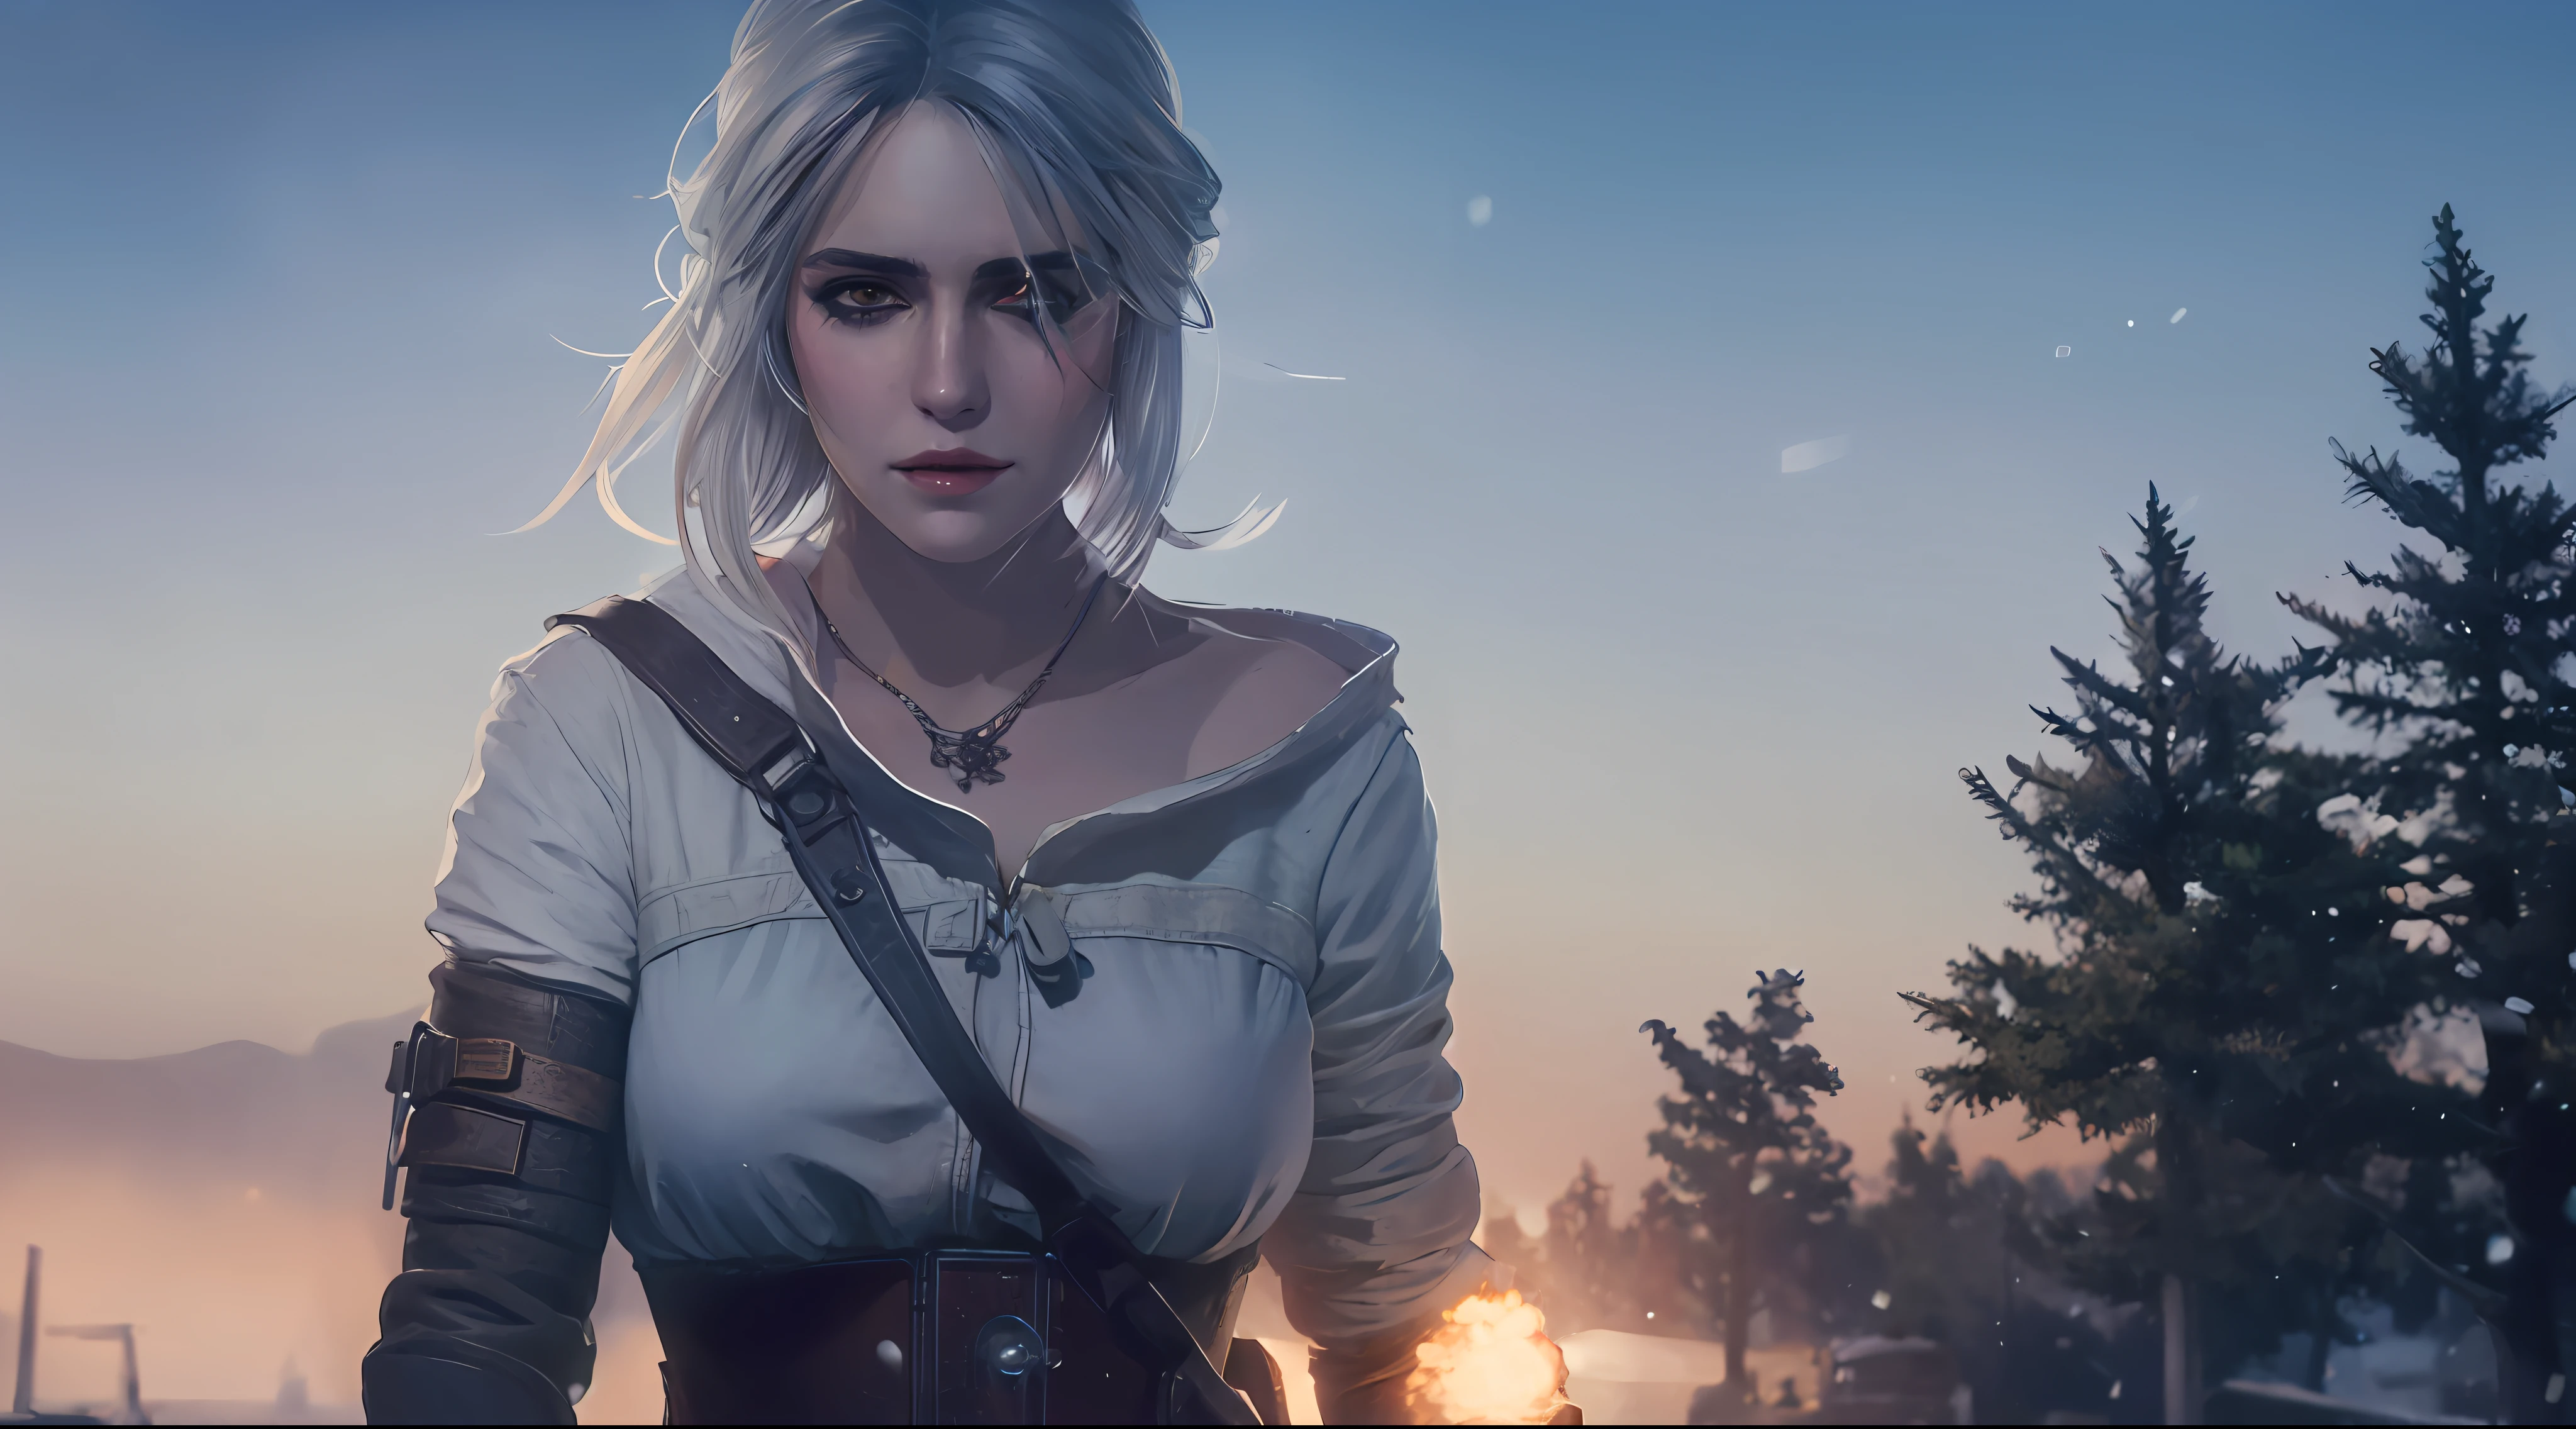 Realism, a woman in a sweater standing on a snowfield, CIRI, Guvez style artwork, Siri from the Wizard, The Sorcerer)), Artgerm and Atey Ghailan, 4K detailed digital art, Best Art Station for Fan Art, epic portrait illustration, stunning character art, winter concept art, Alena Aenami and Artgerm, super clear big picture, super high quality